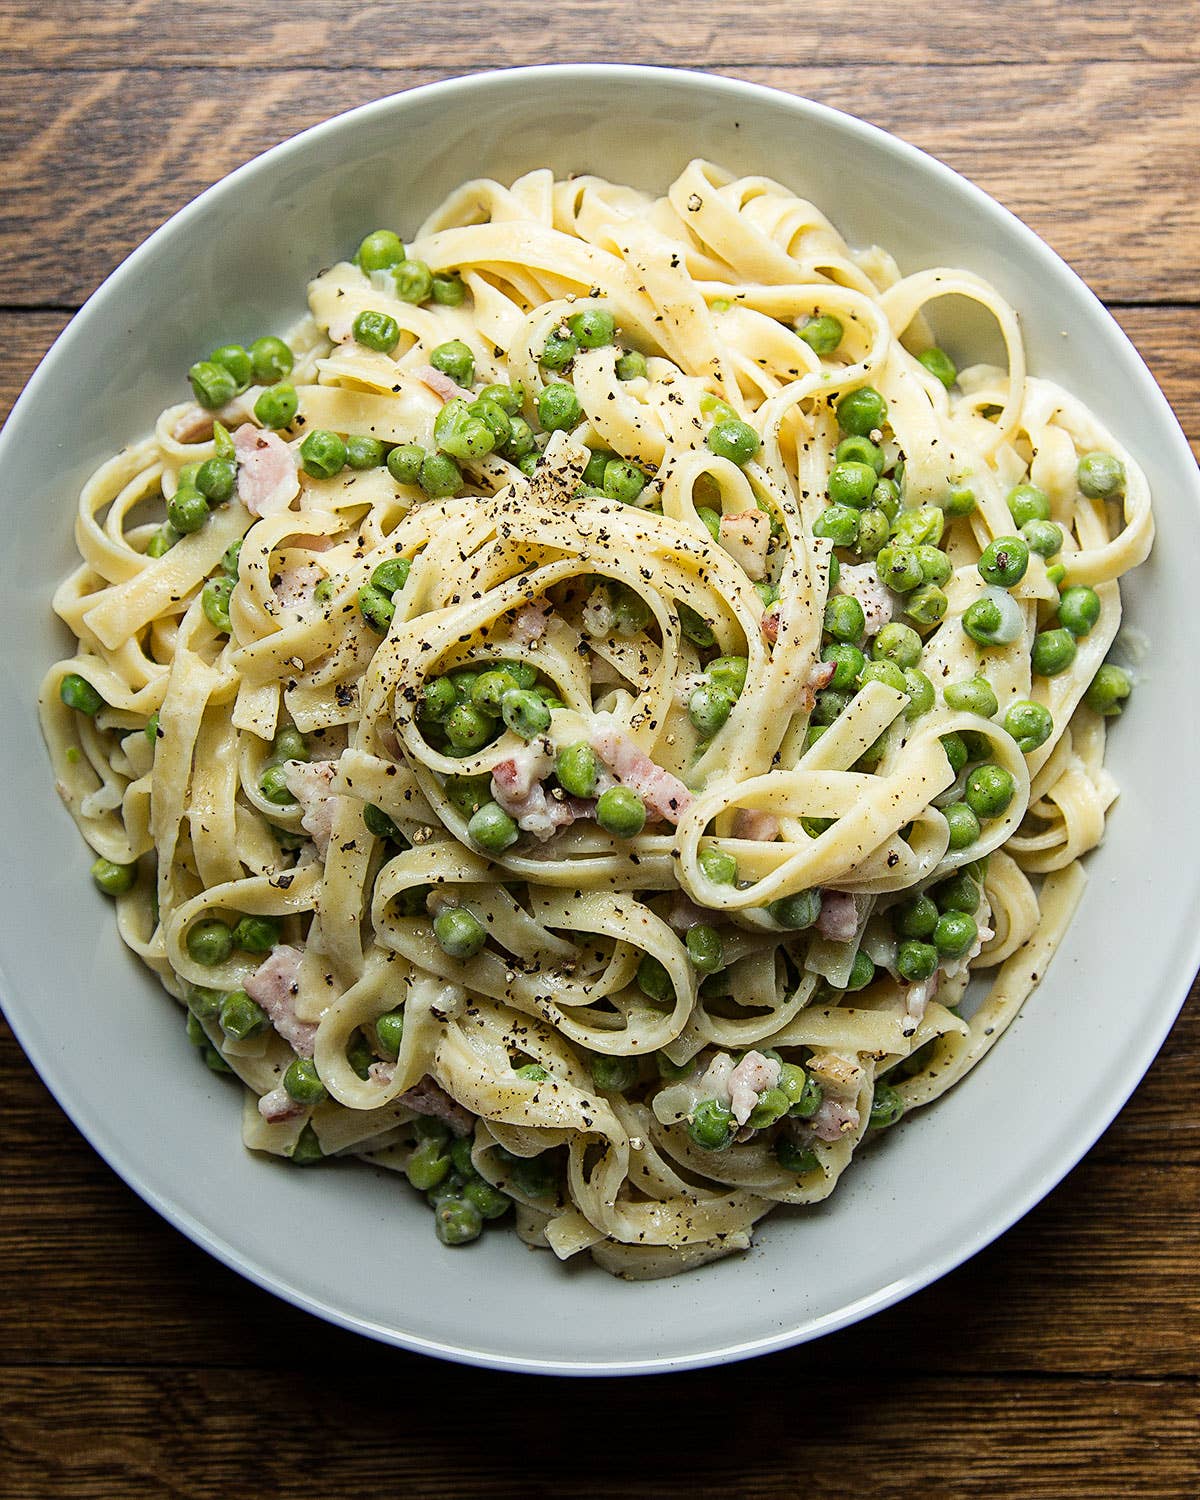 Add Pasta With Peas to Your Regular Weeknight Dinner Rotation